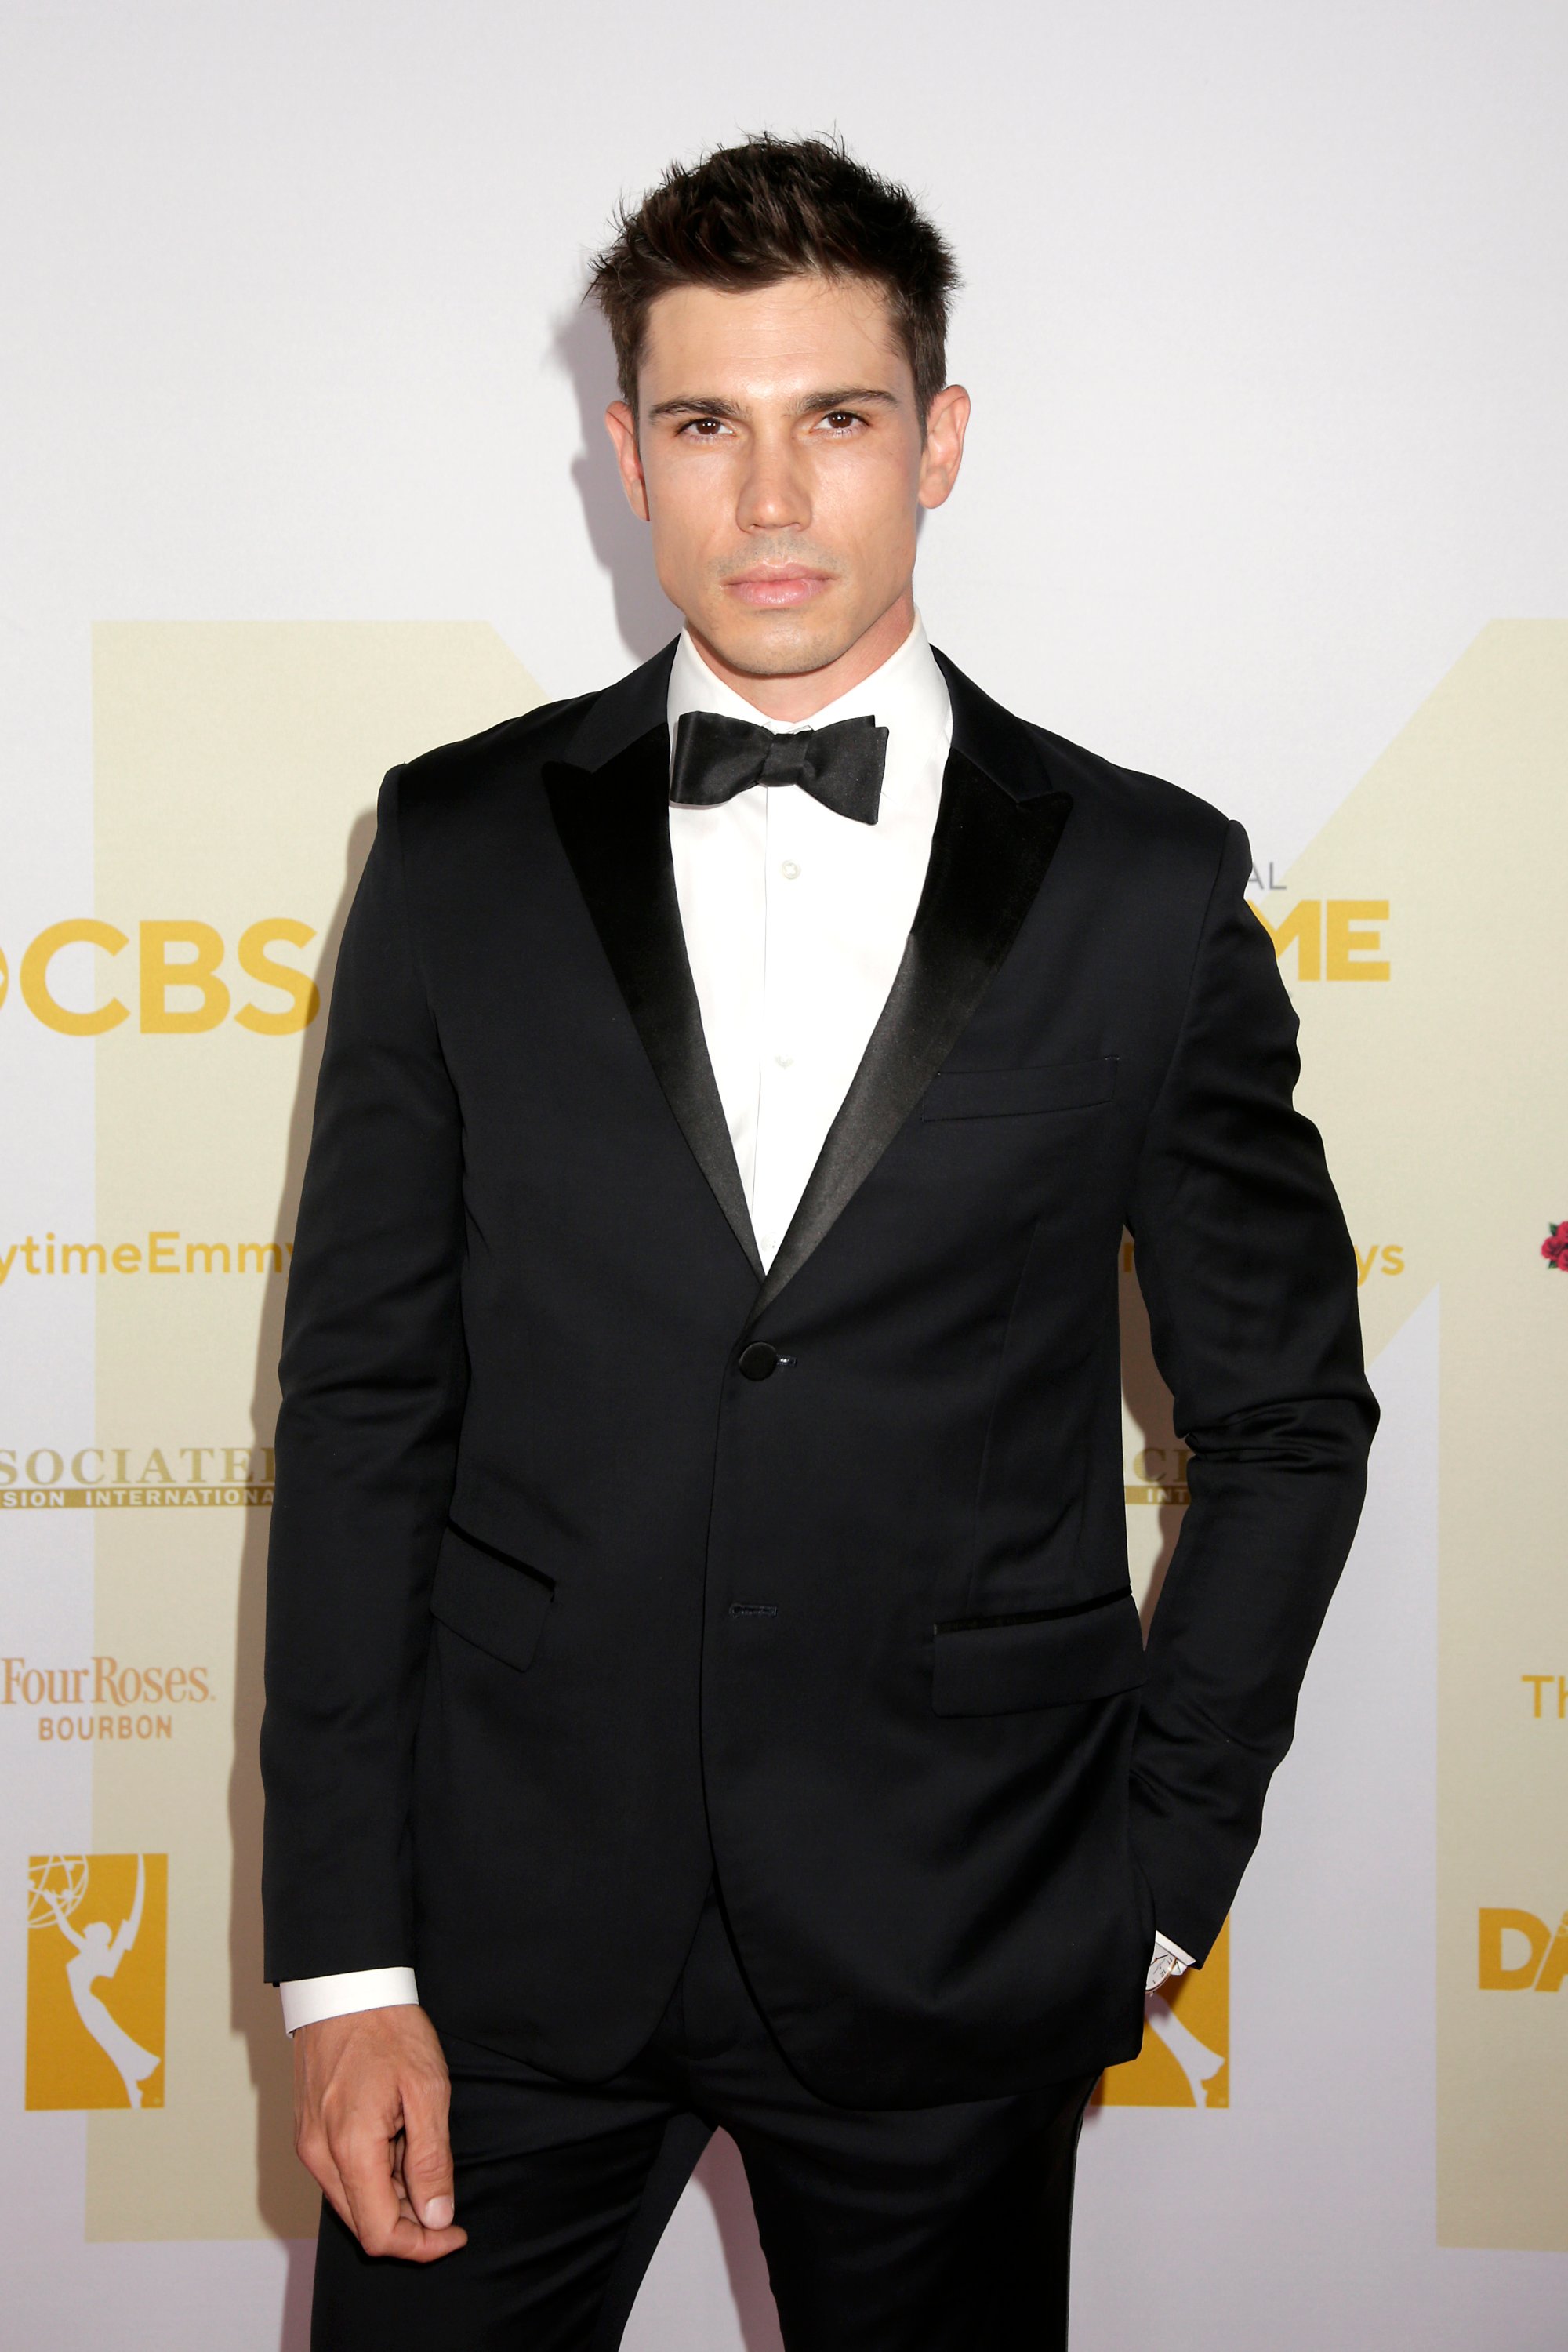 'The Bold and the Beautiful' actor Tanner Novlan wearing a tuxedo during the Daytime Emmy Awards.